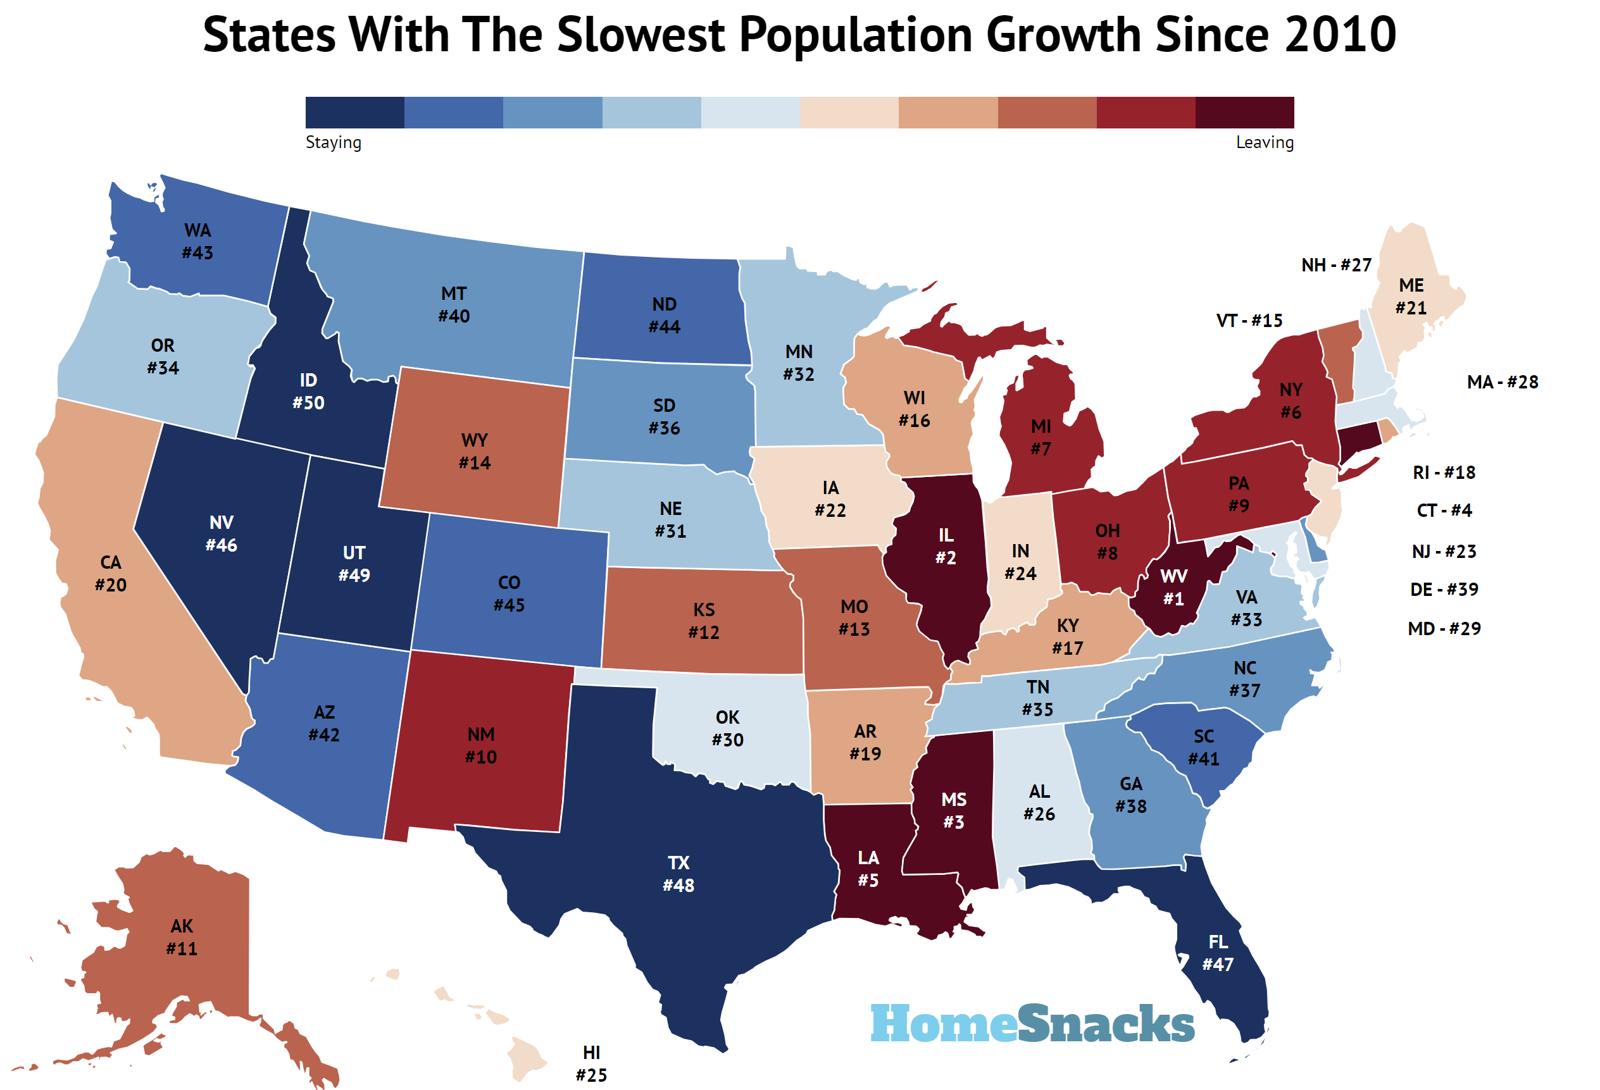 States With The Slowest Population Growth Since 2010 